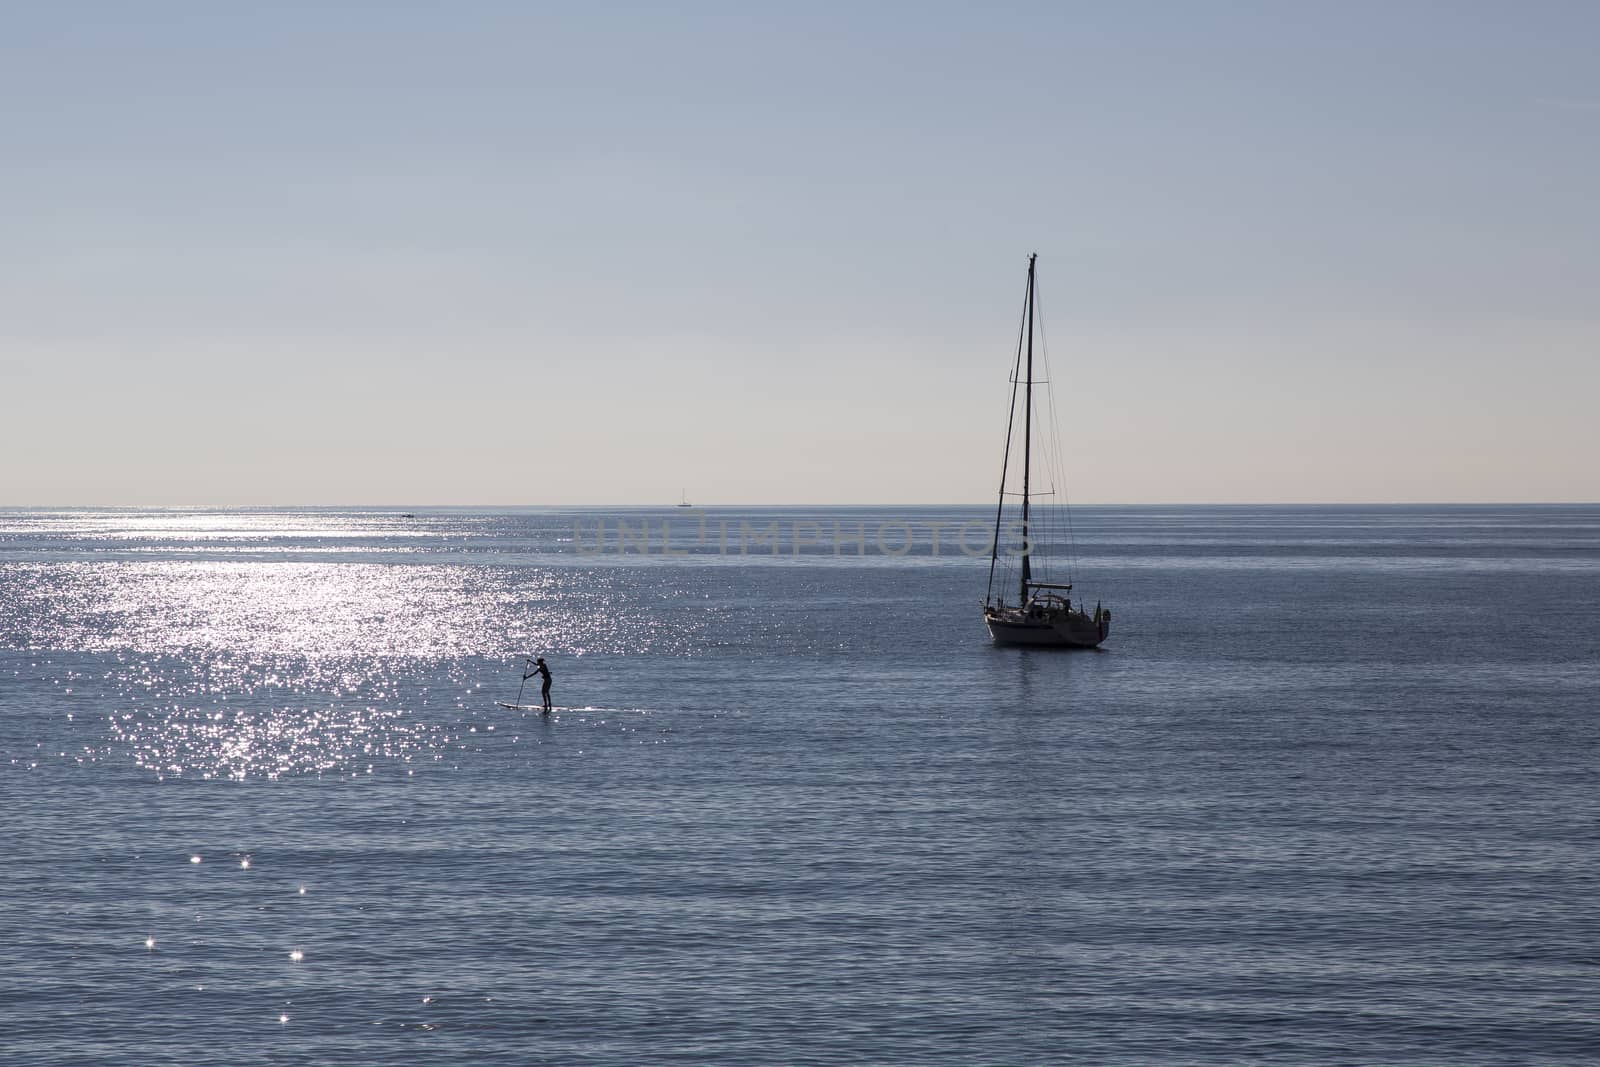 Panoramic view of an Italian seaside landscape on a sunny day with a boat on the horizon